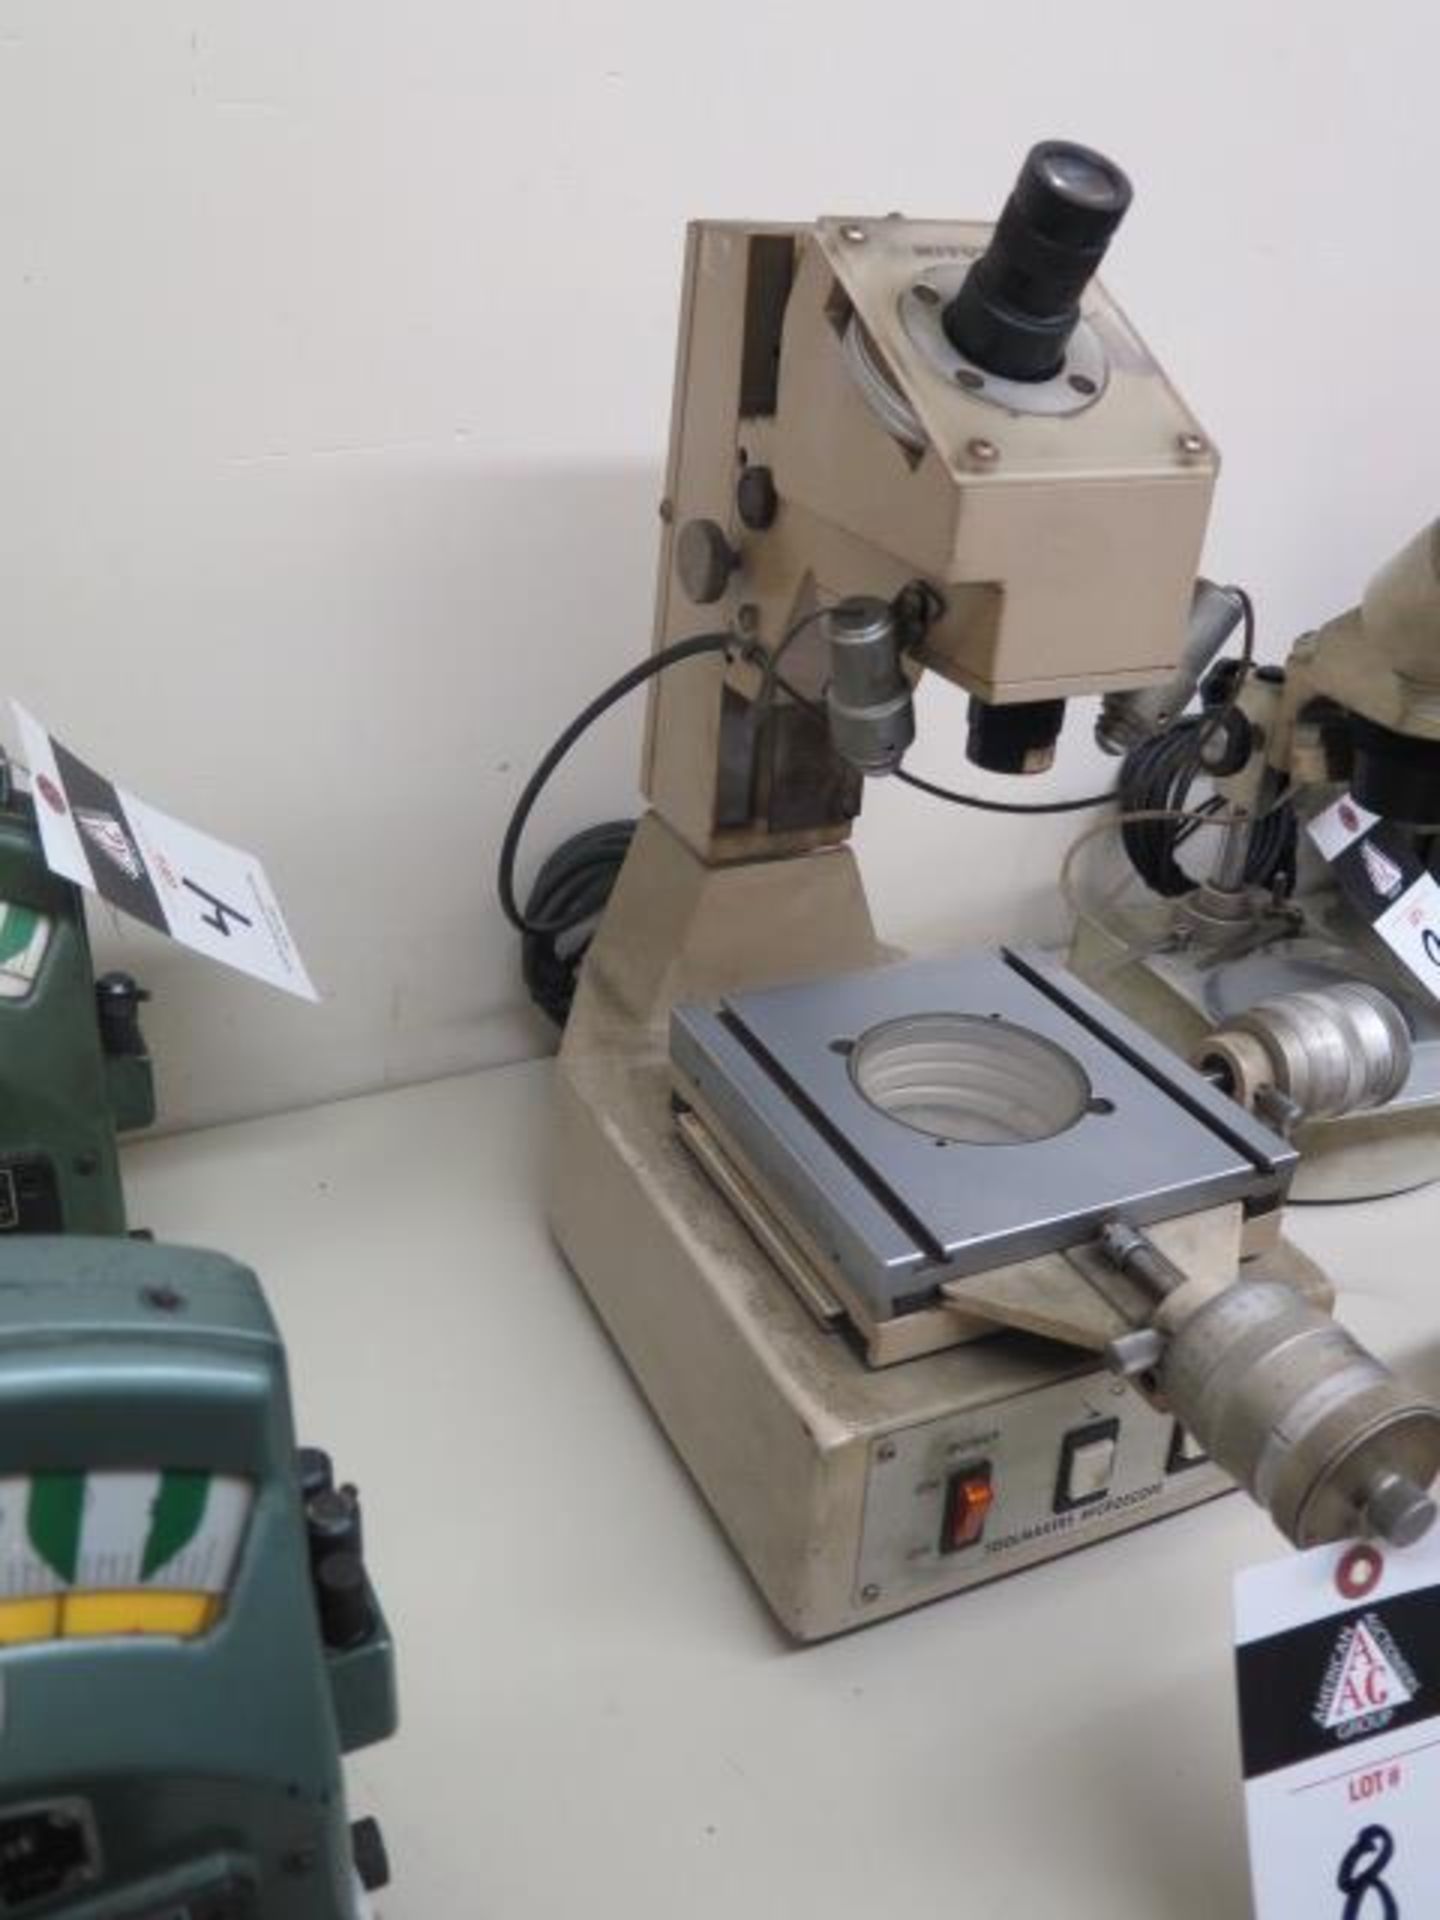 Mitutoyo Tool Makers Microscope w/ Light Source (SOLD AS-IS - NO WARRANTY) - Image 3 of 9